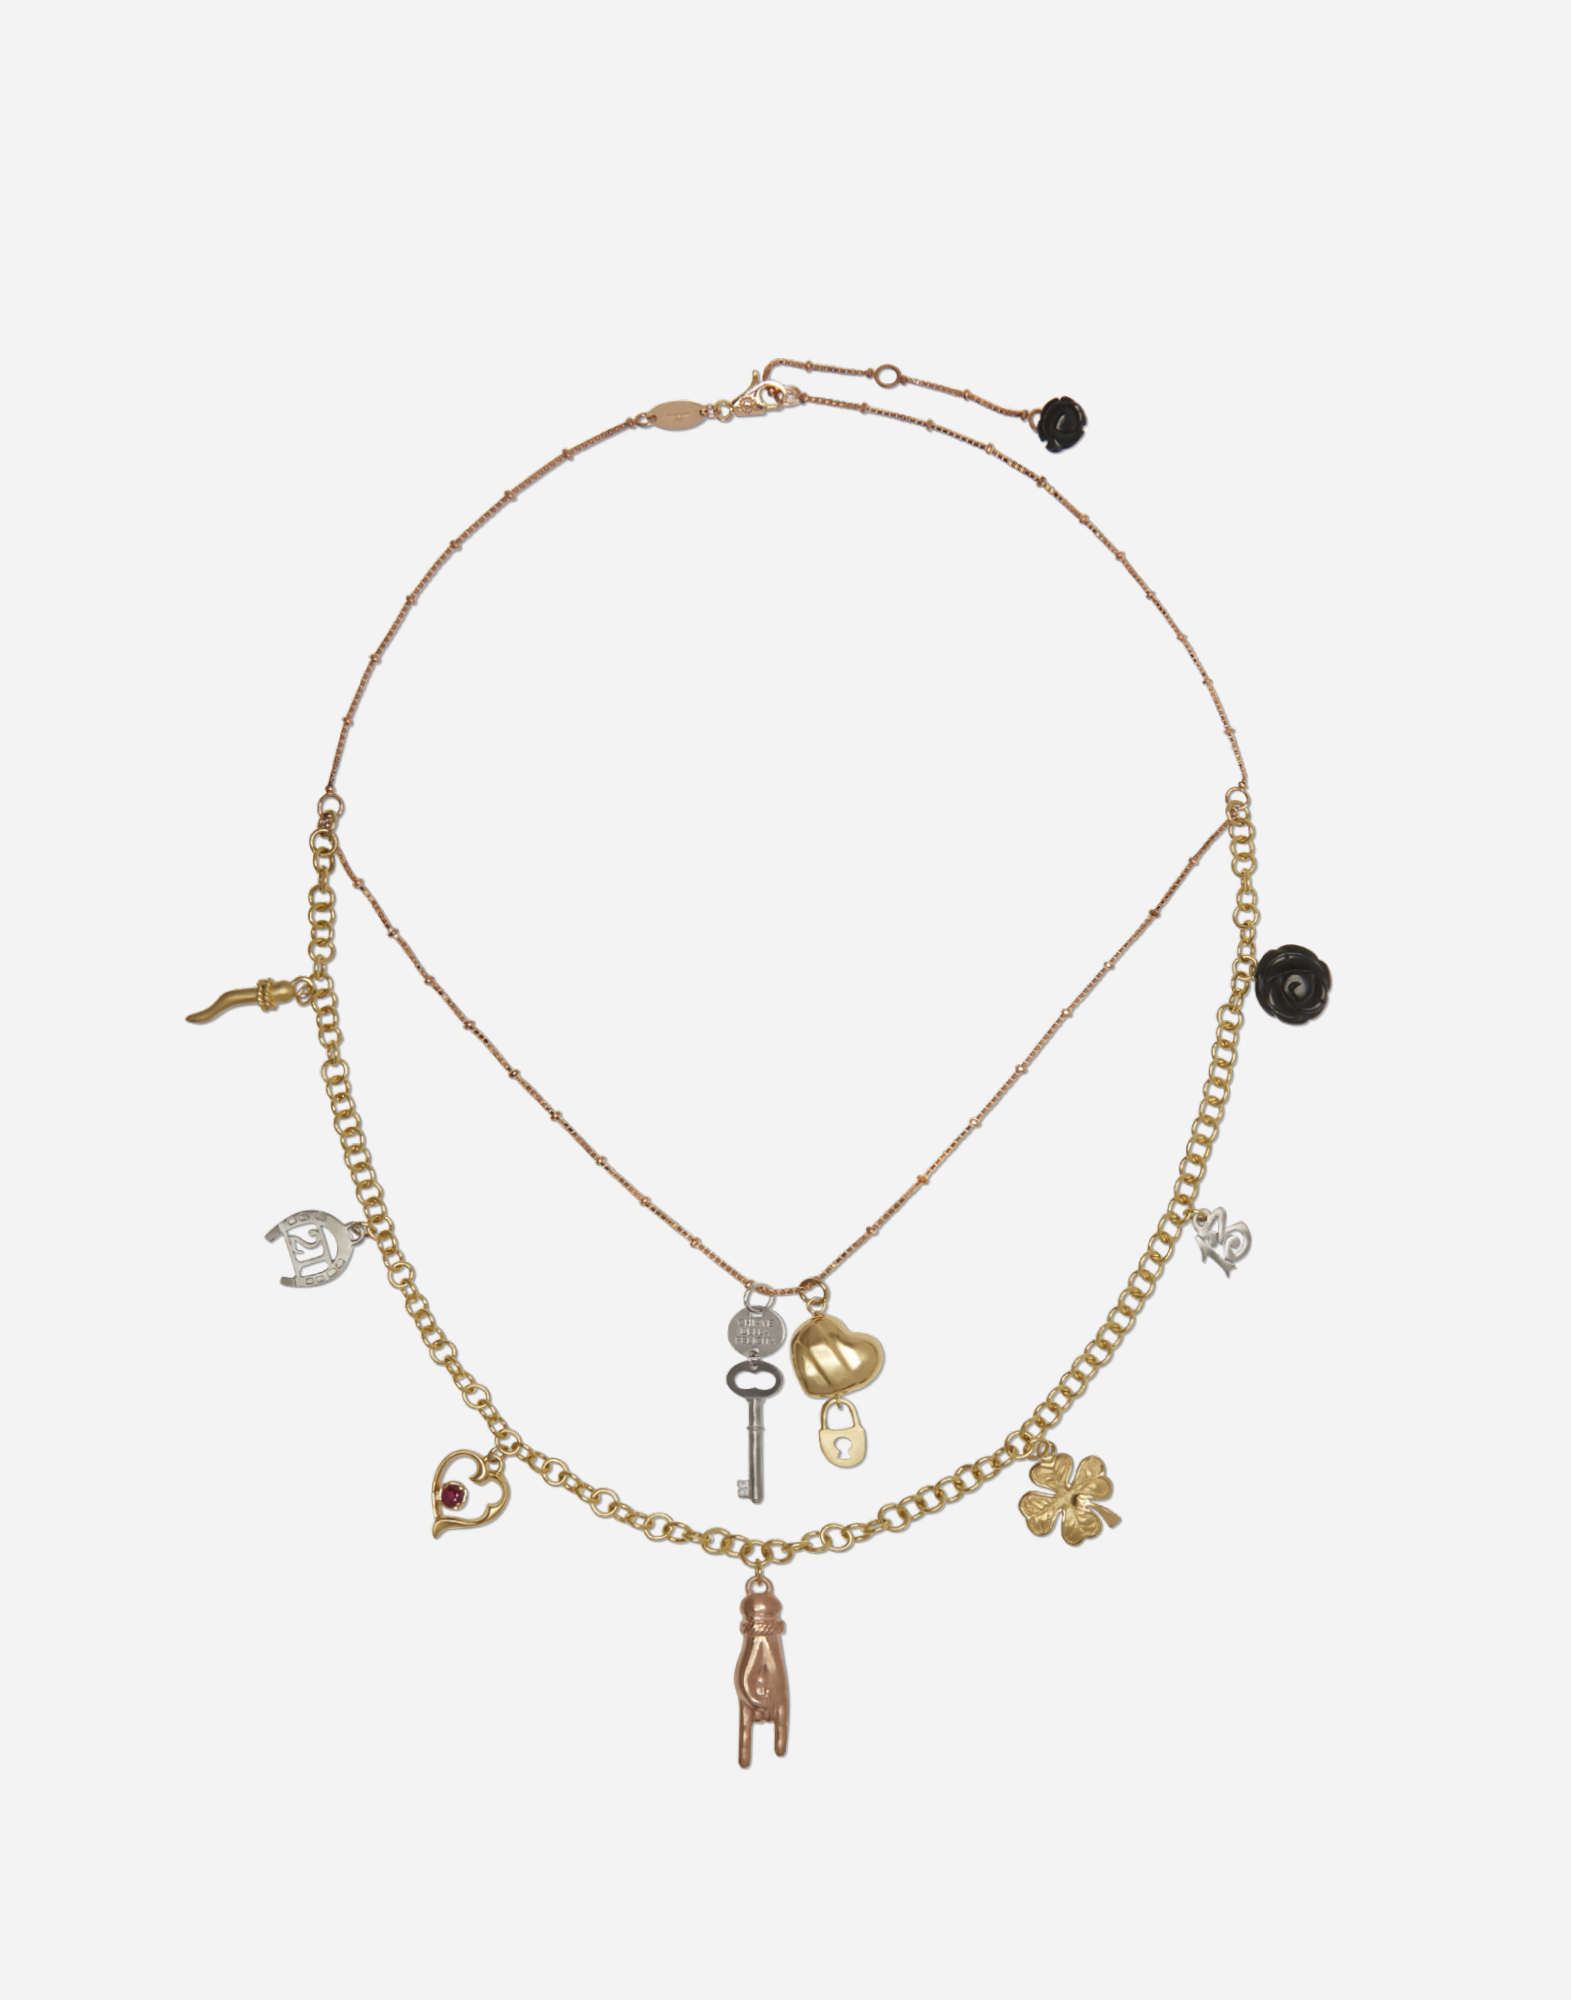 Dolce & Gabbana Yellow, White And Red Gold Good Luck Necklace With Black And Ruby Jade Details